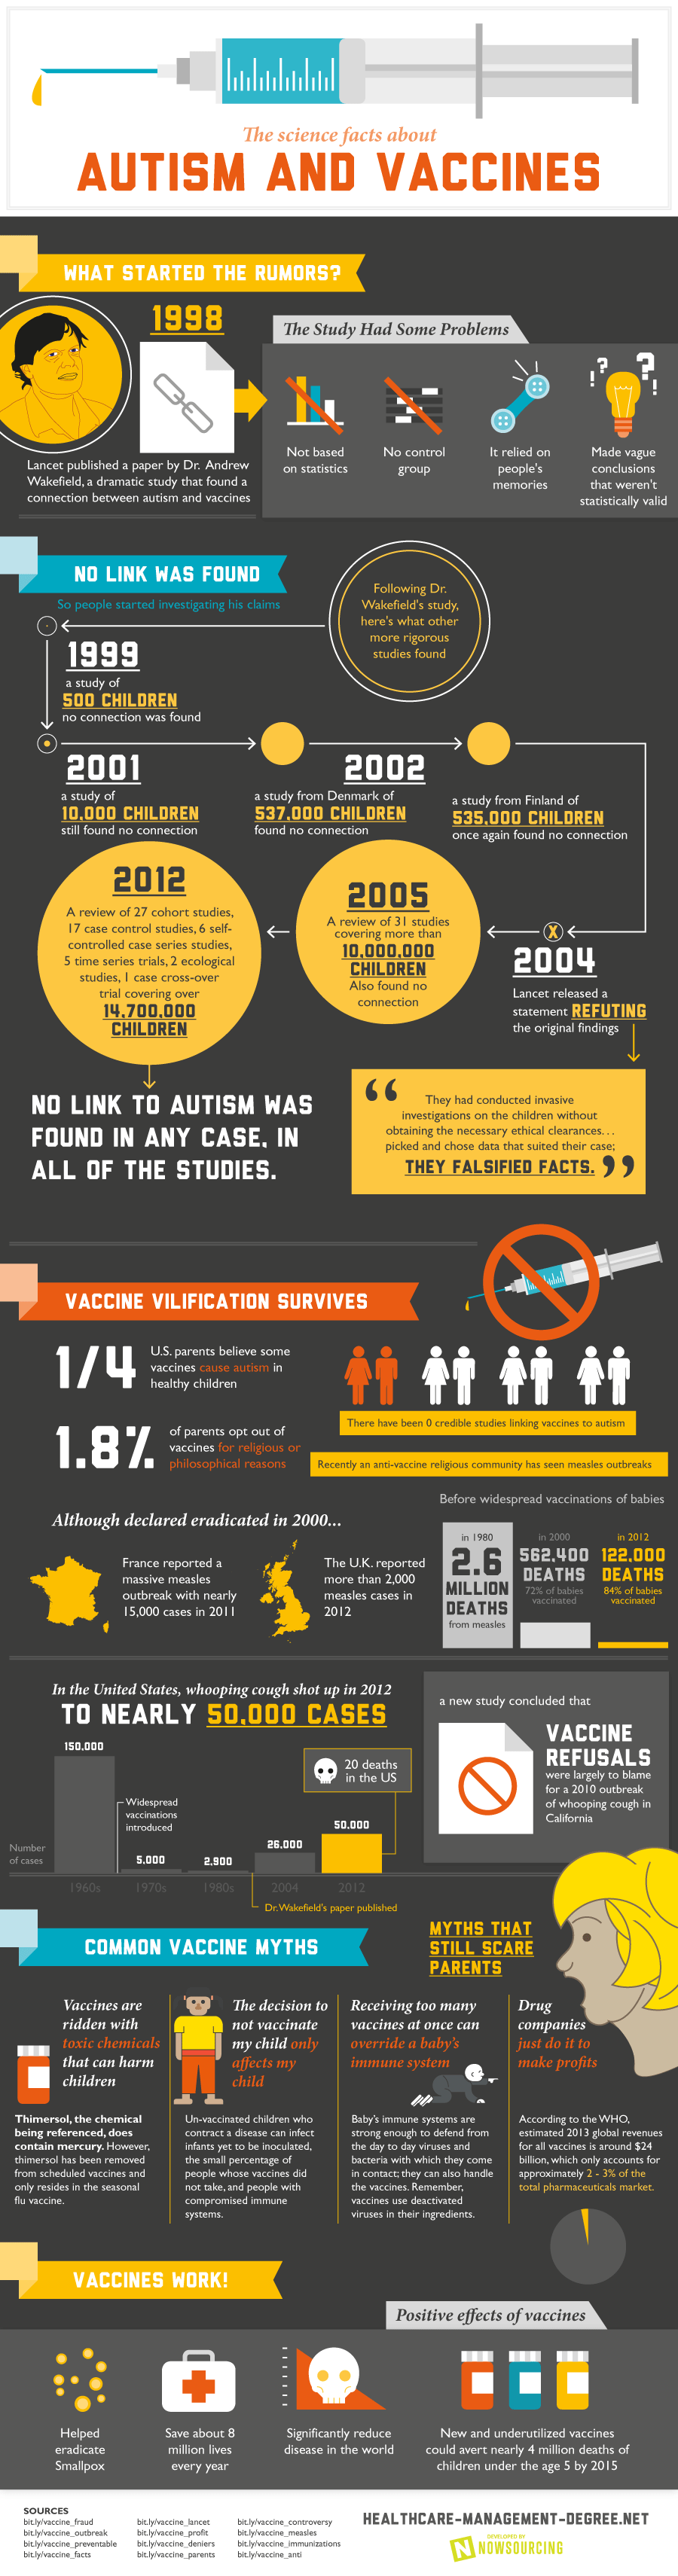 new research on vaccines and autism